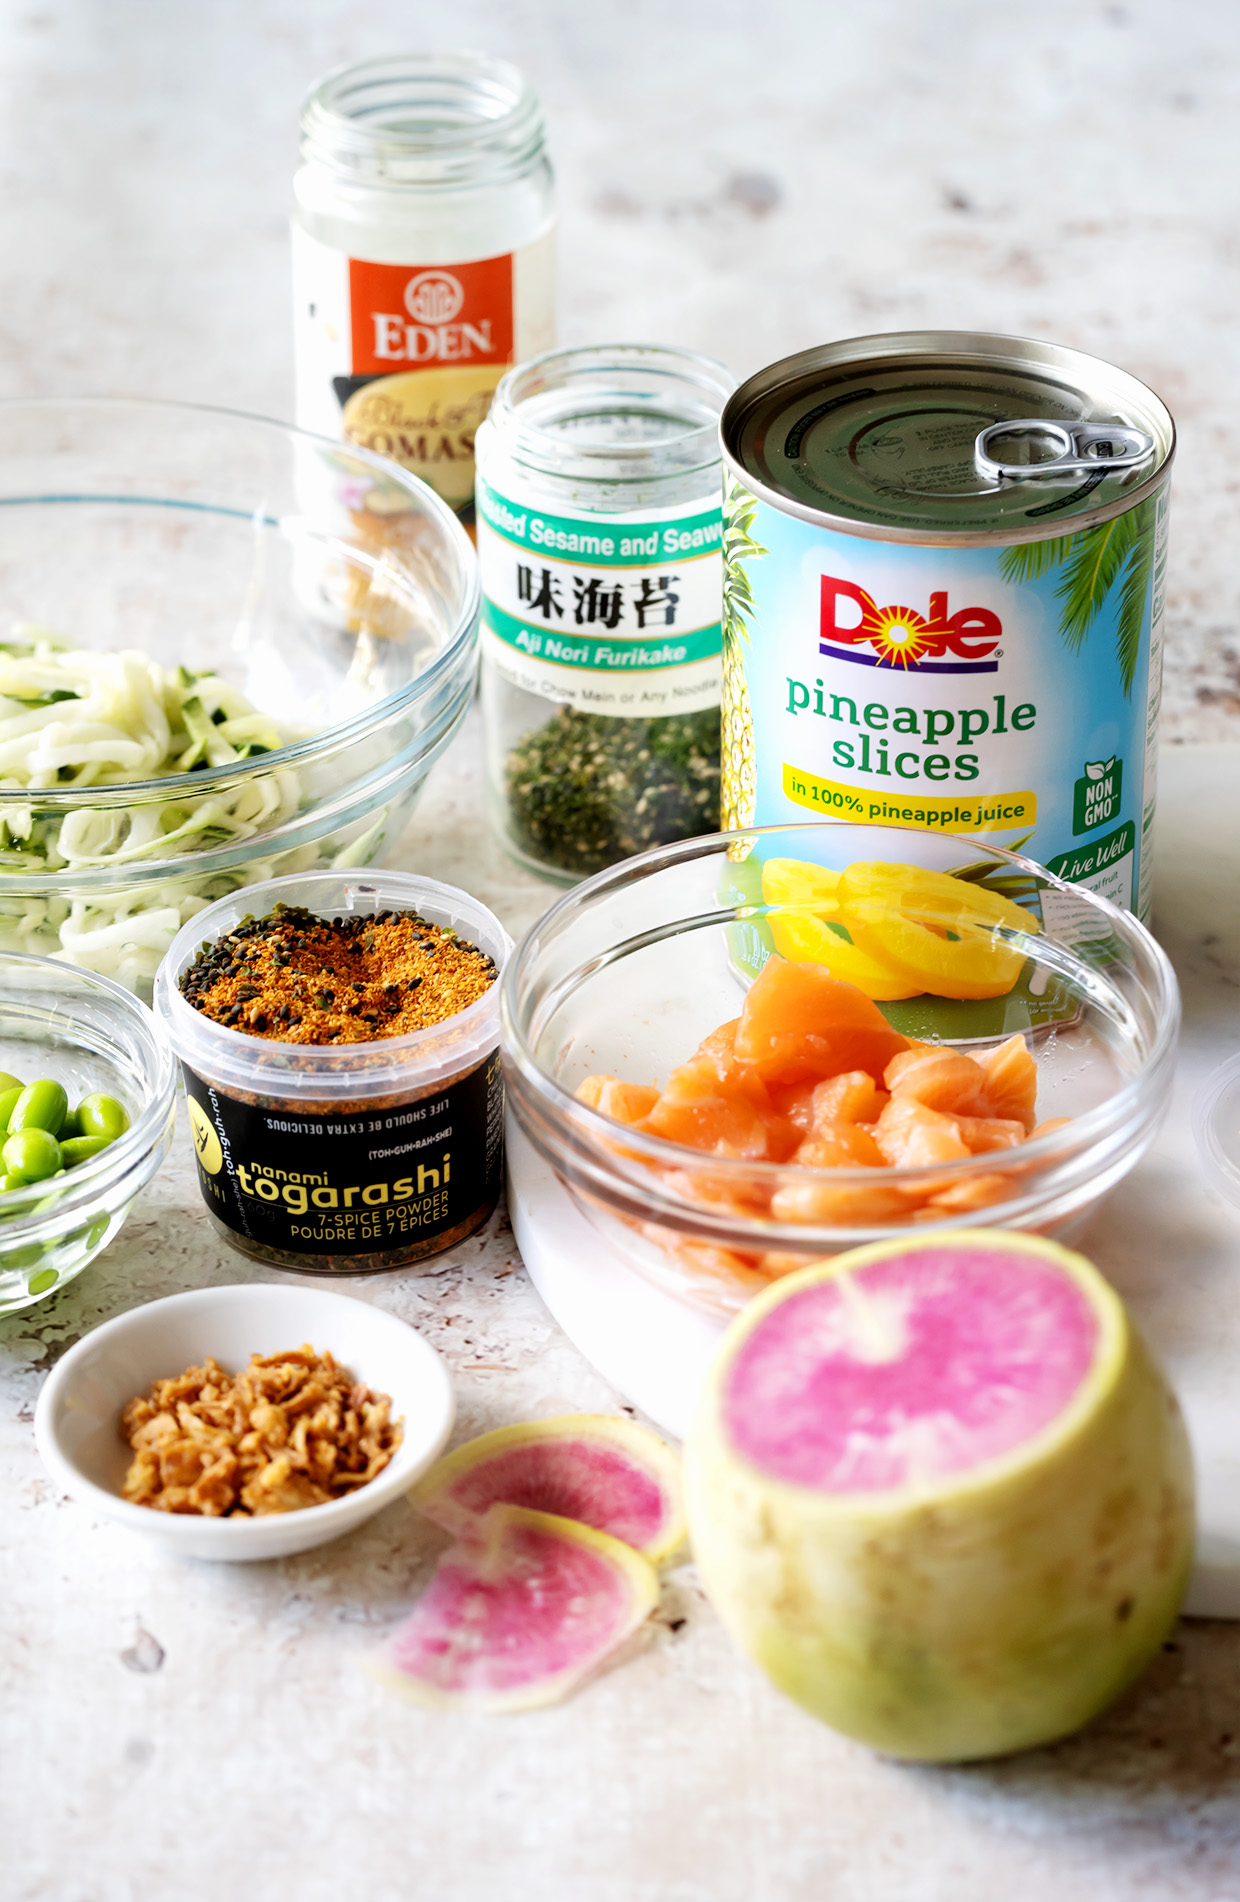 The ingredients for making a salmon bowl include, salmon, pineapple rings, zucchini noodels, edamame, Togarashi, Furikake, spicy mayo and ponzu sauce